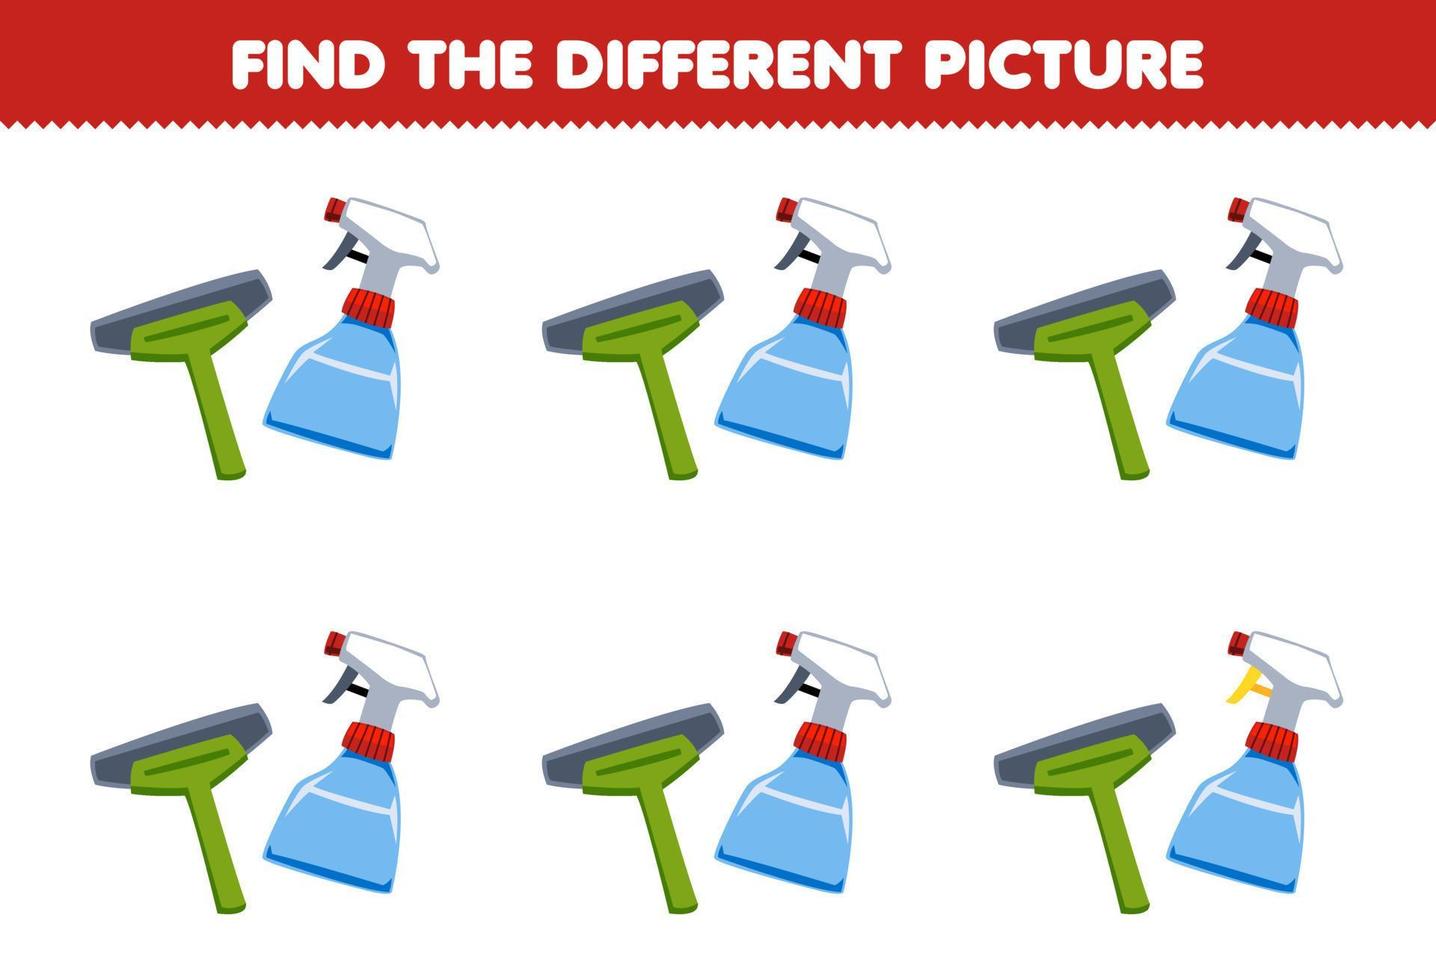 Education game for children find the different picture of cute cartoon squeegee and sprayer printable tool worksheet vector